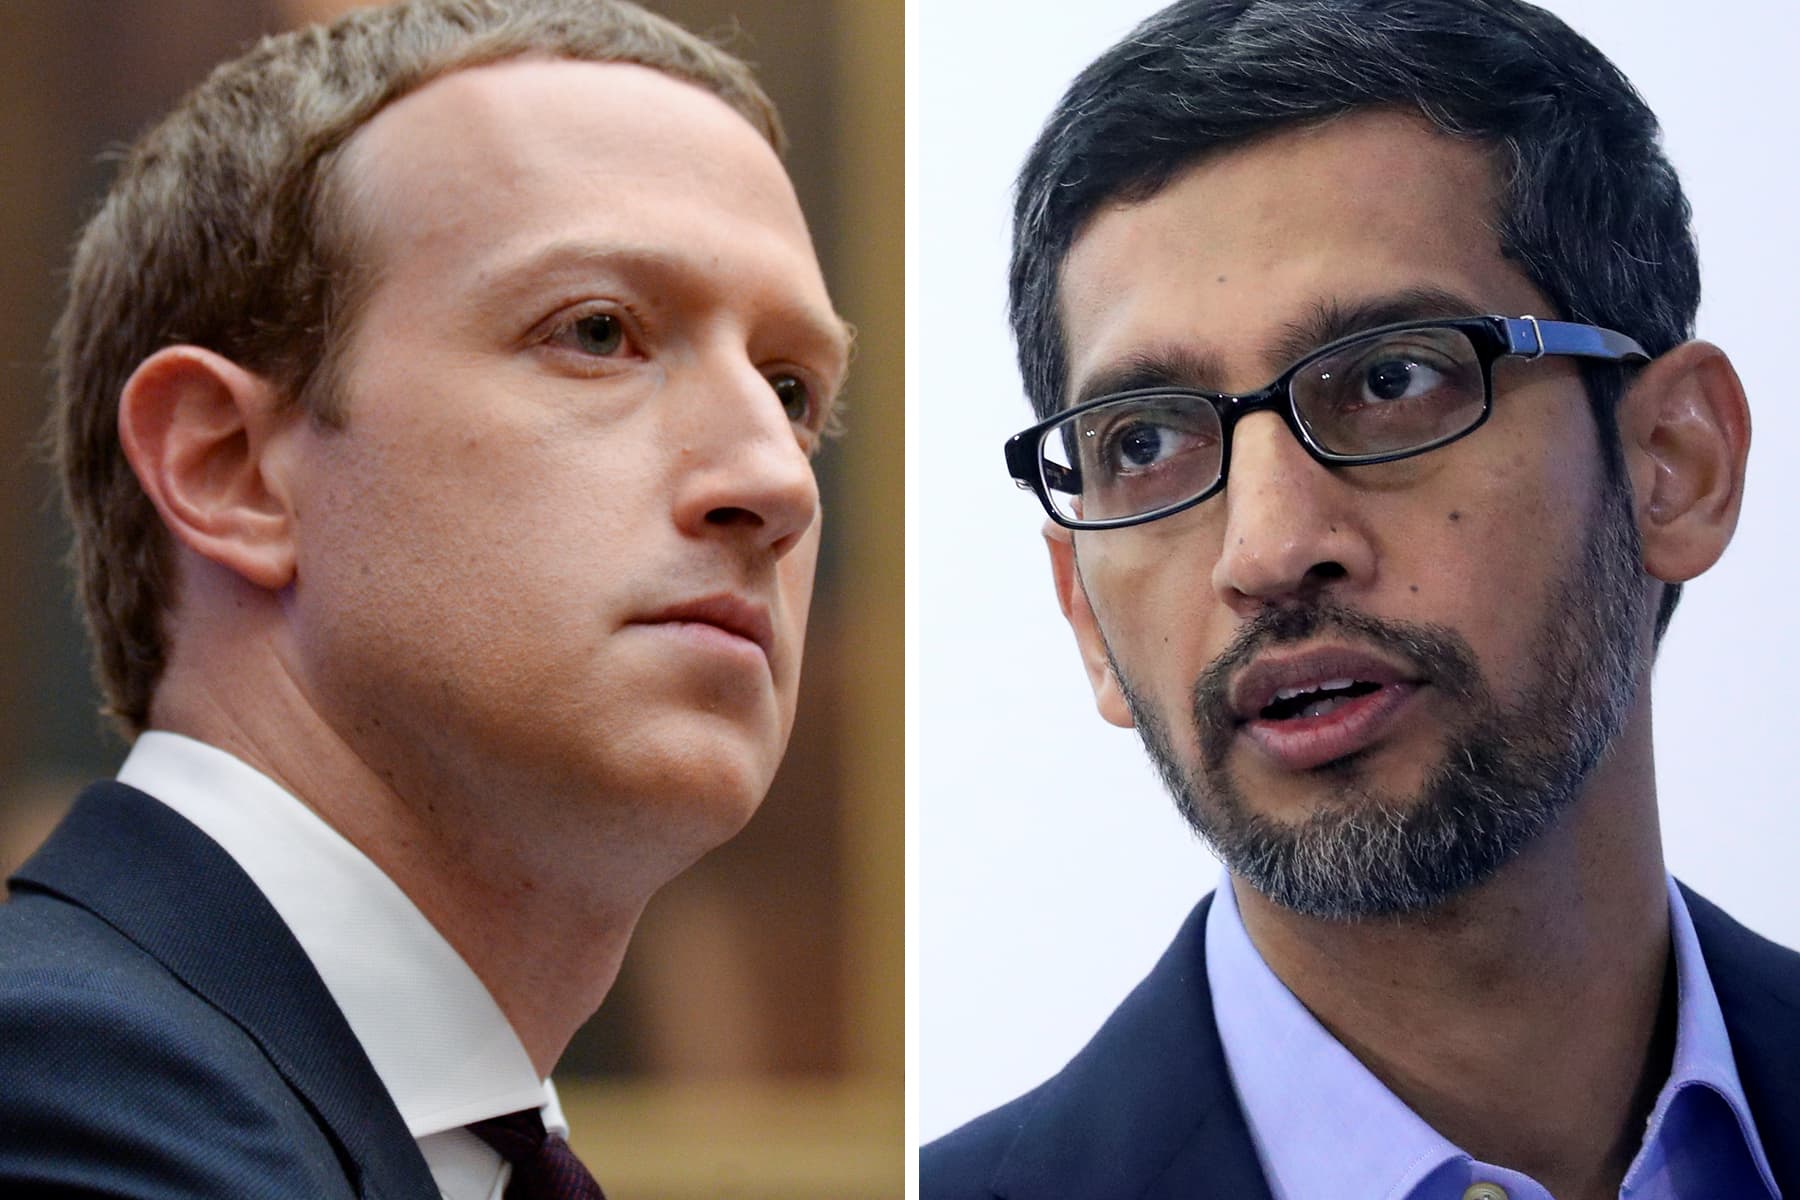 Google, Facebook CEOs oversaw illegal ad auction deal, states allege